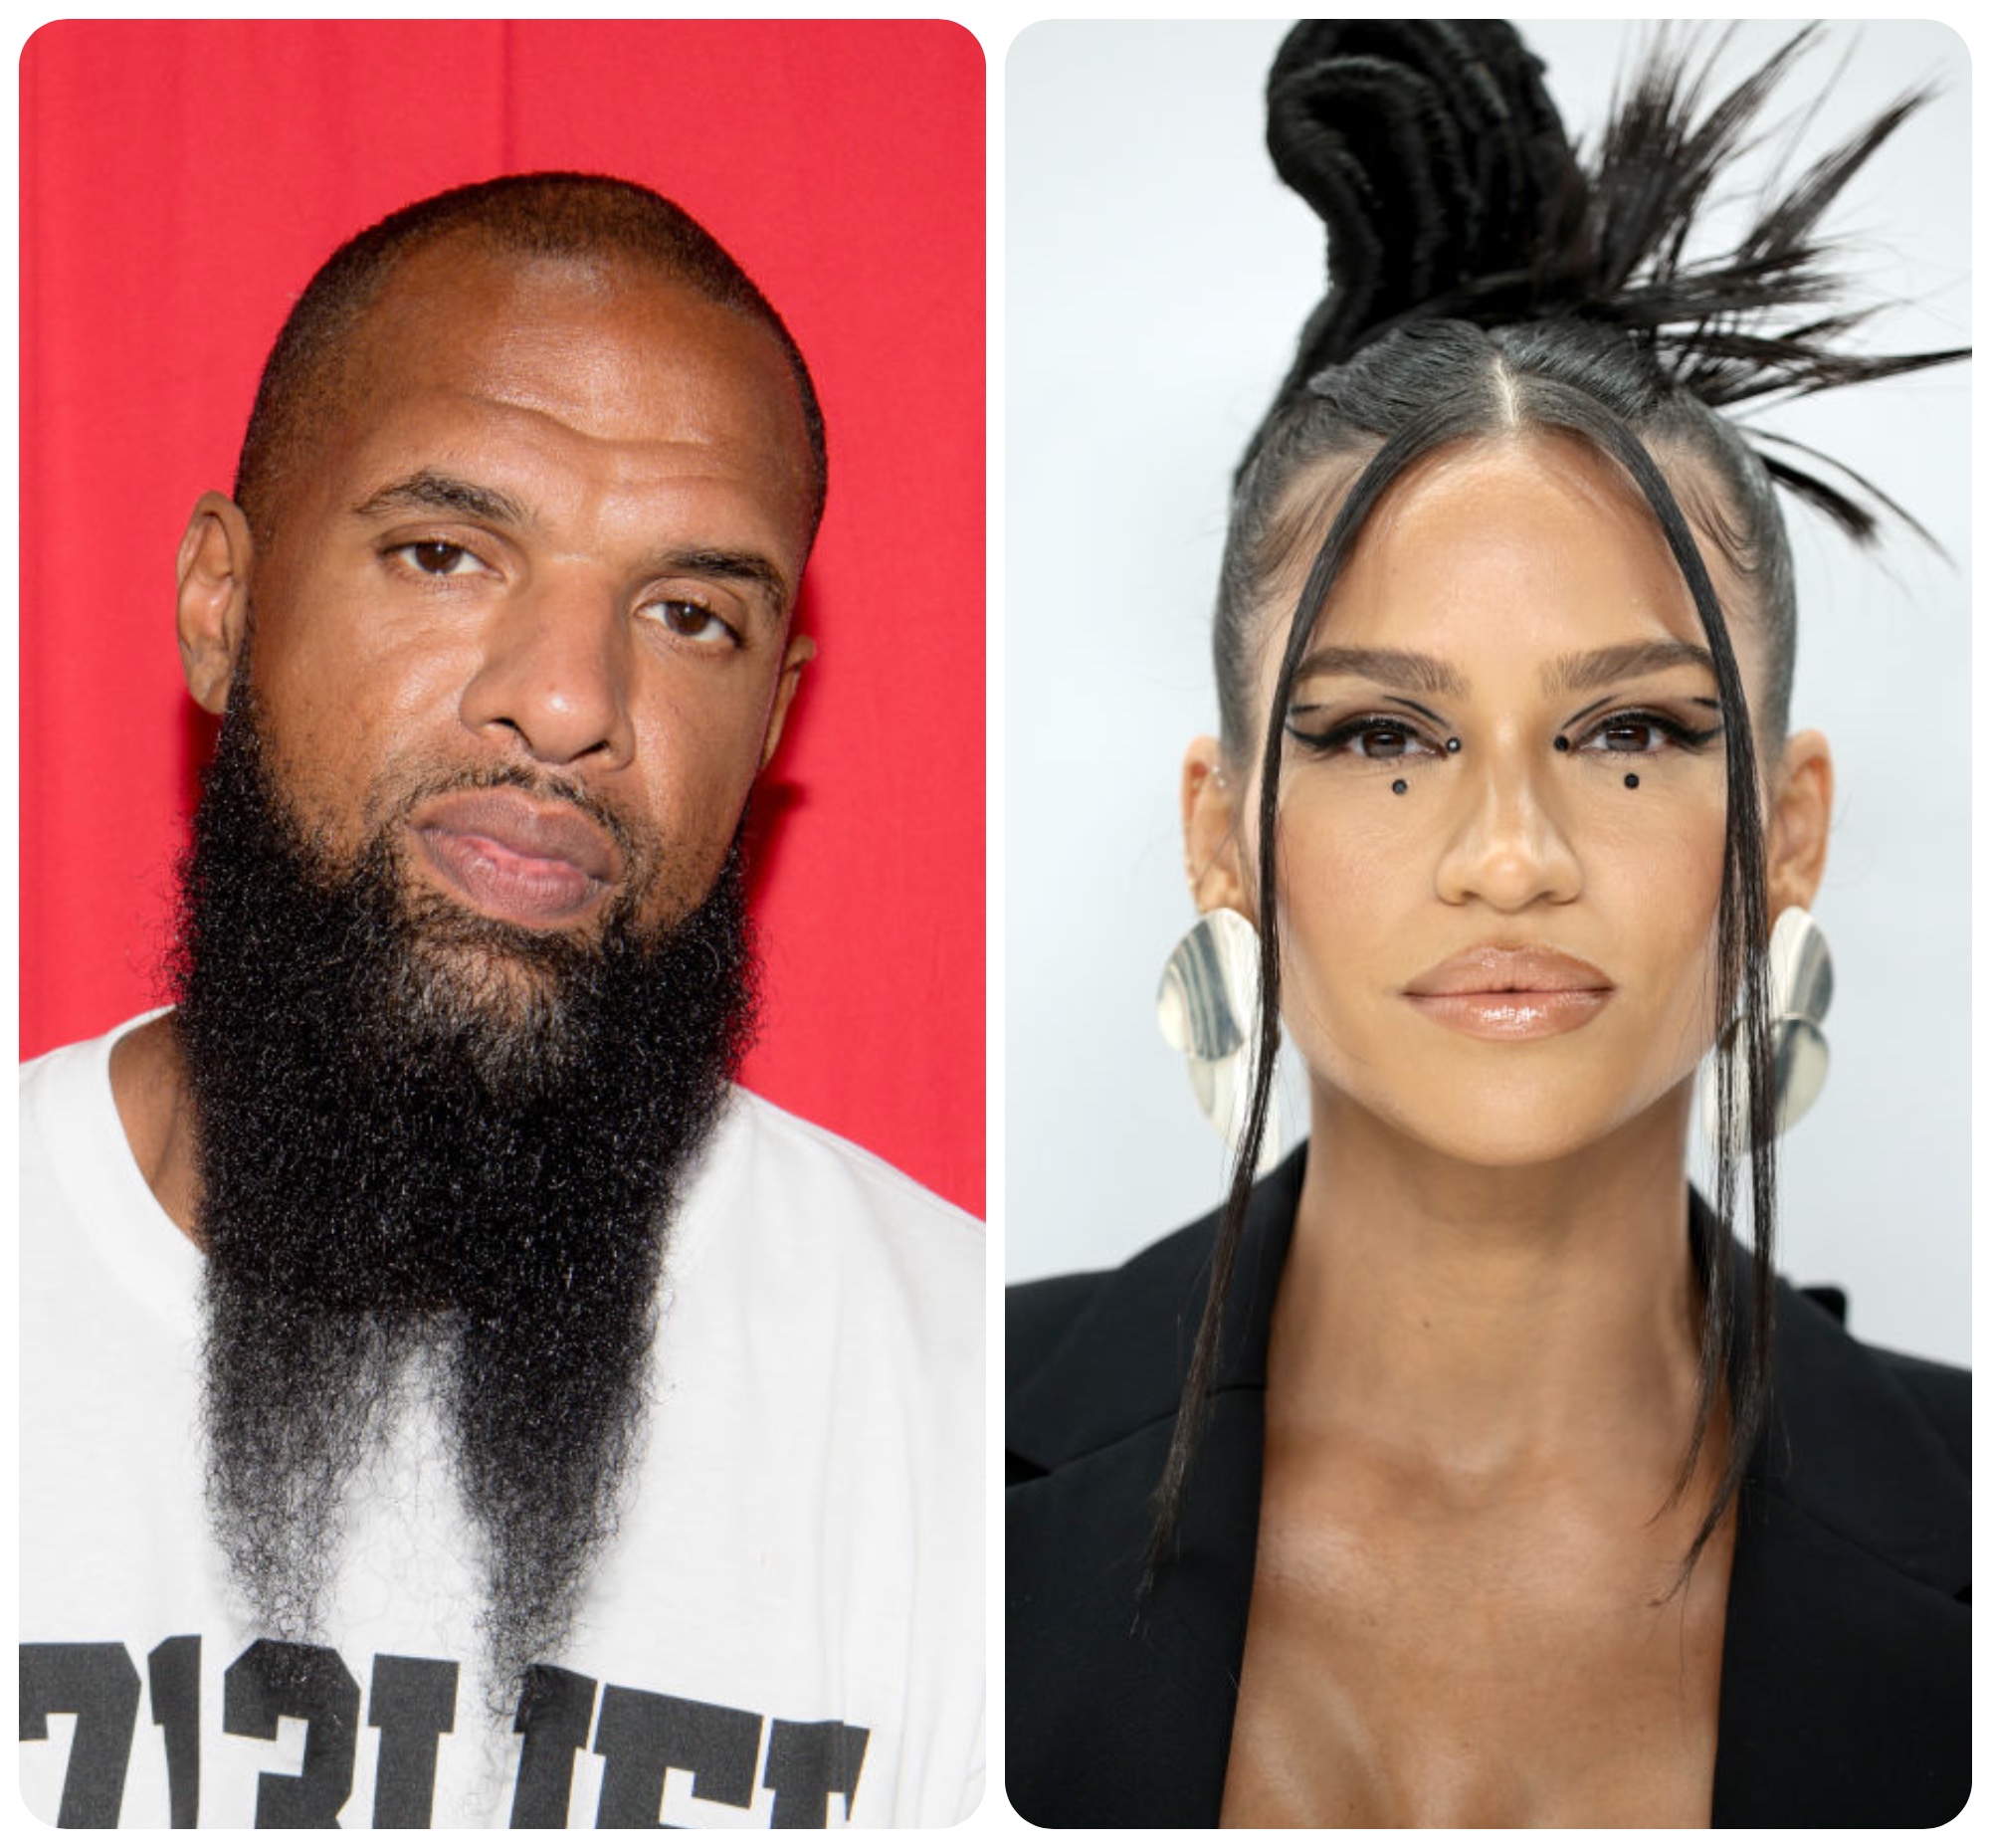 So Sorry: Slim Thug Apologizes To Cassie For Not Believing Her Amid Release Of Diddy Abuse Video –‘I’ll Take This L’